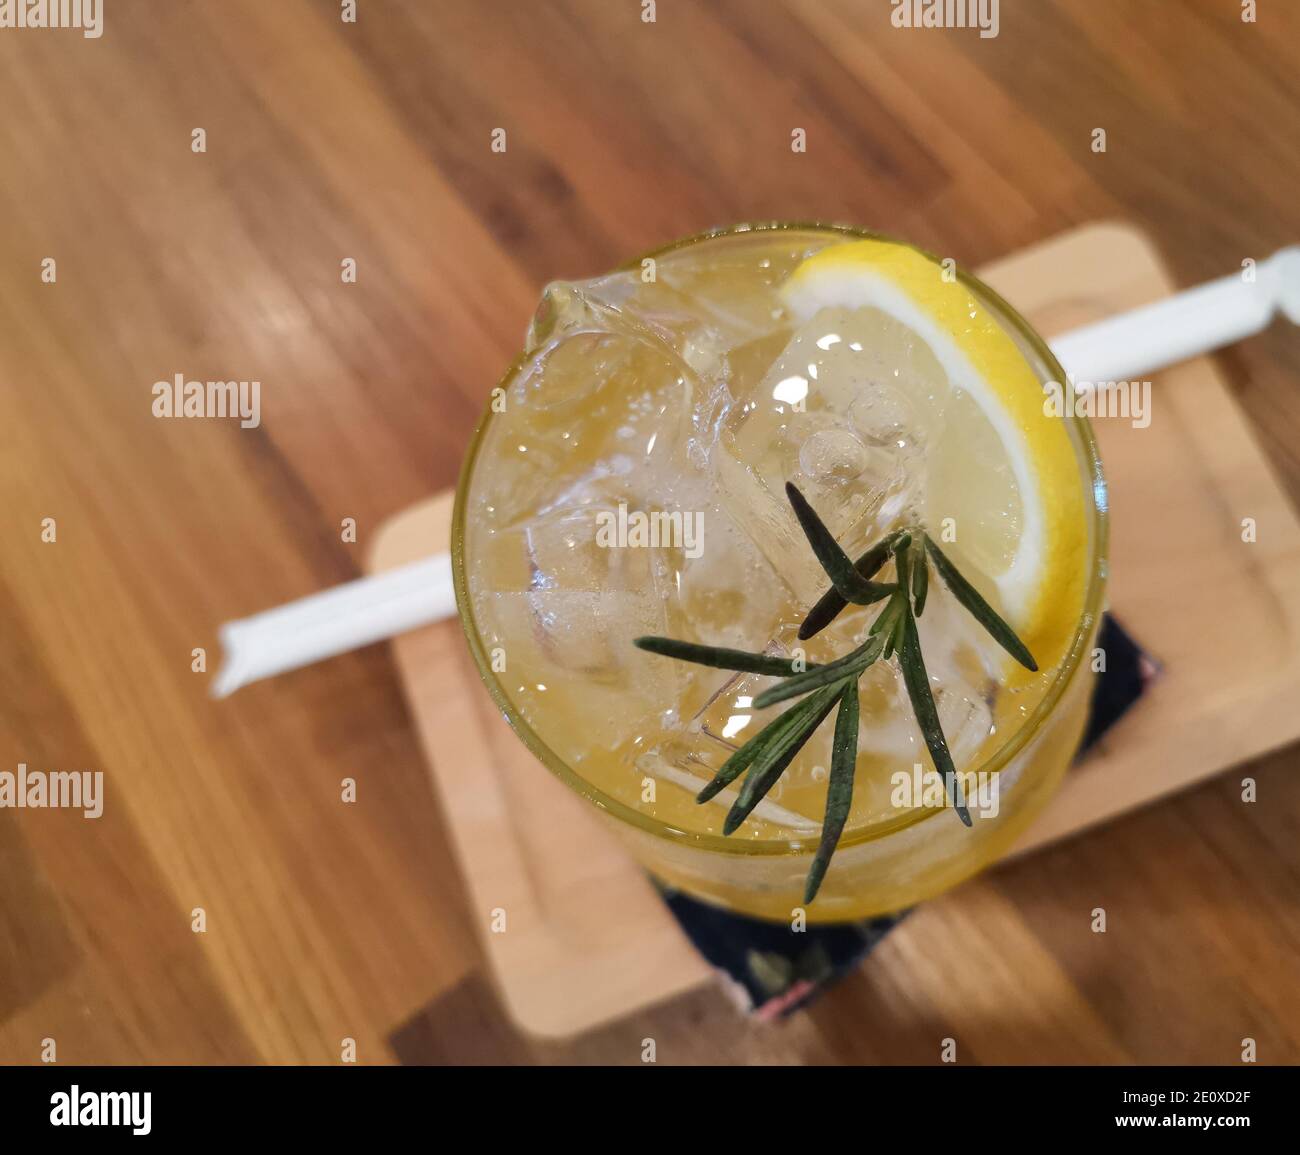 Top view of Yuzu orange drink with soda with ice. Stock Photo